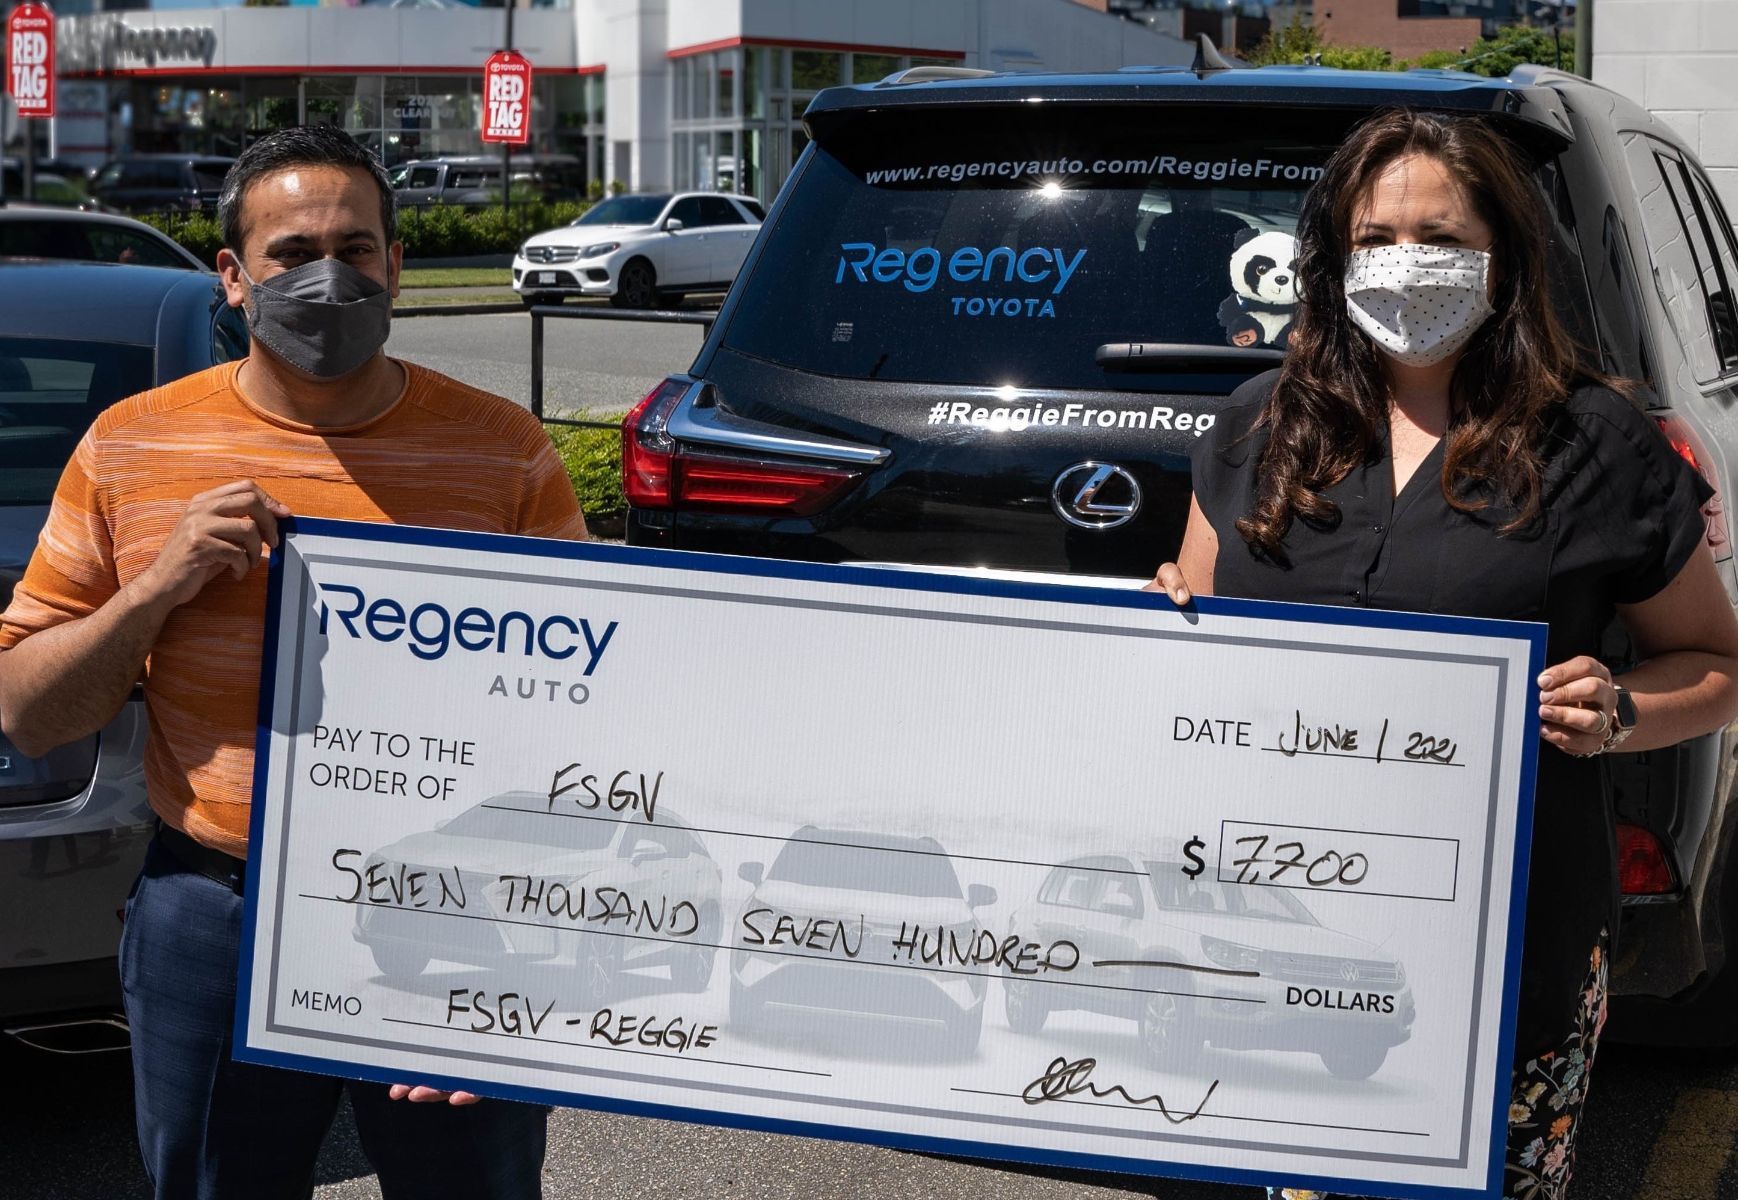 We raised $14,200 for Family Services of Greater Vancouver!